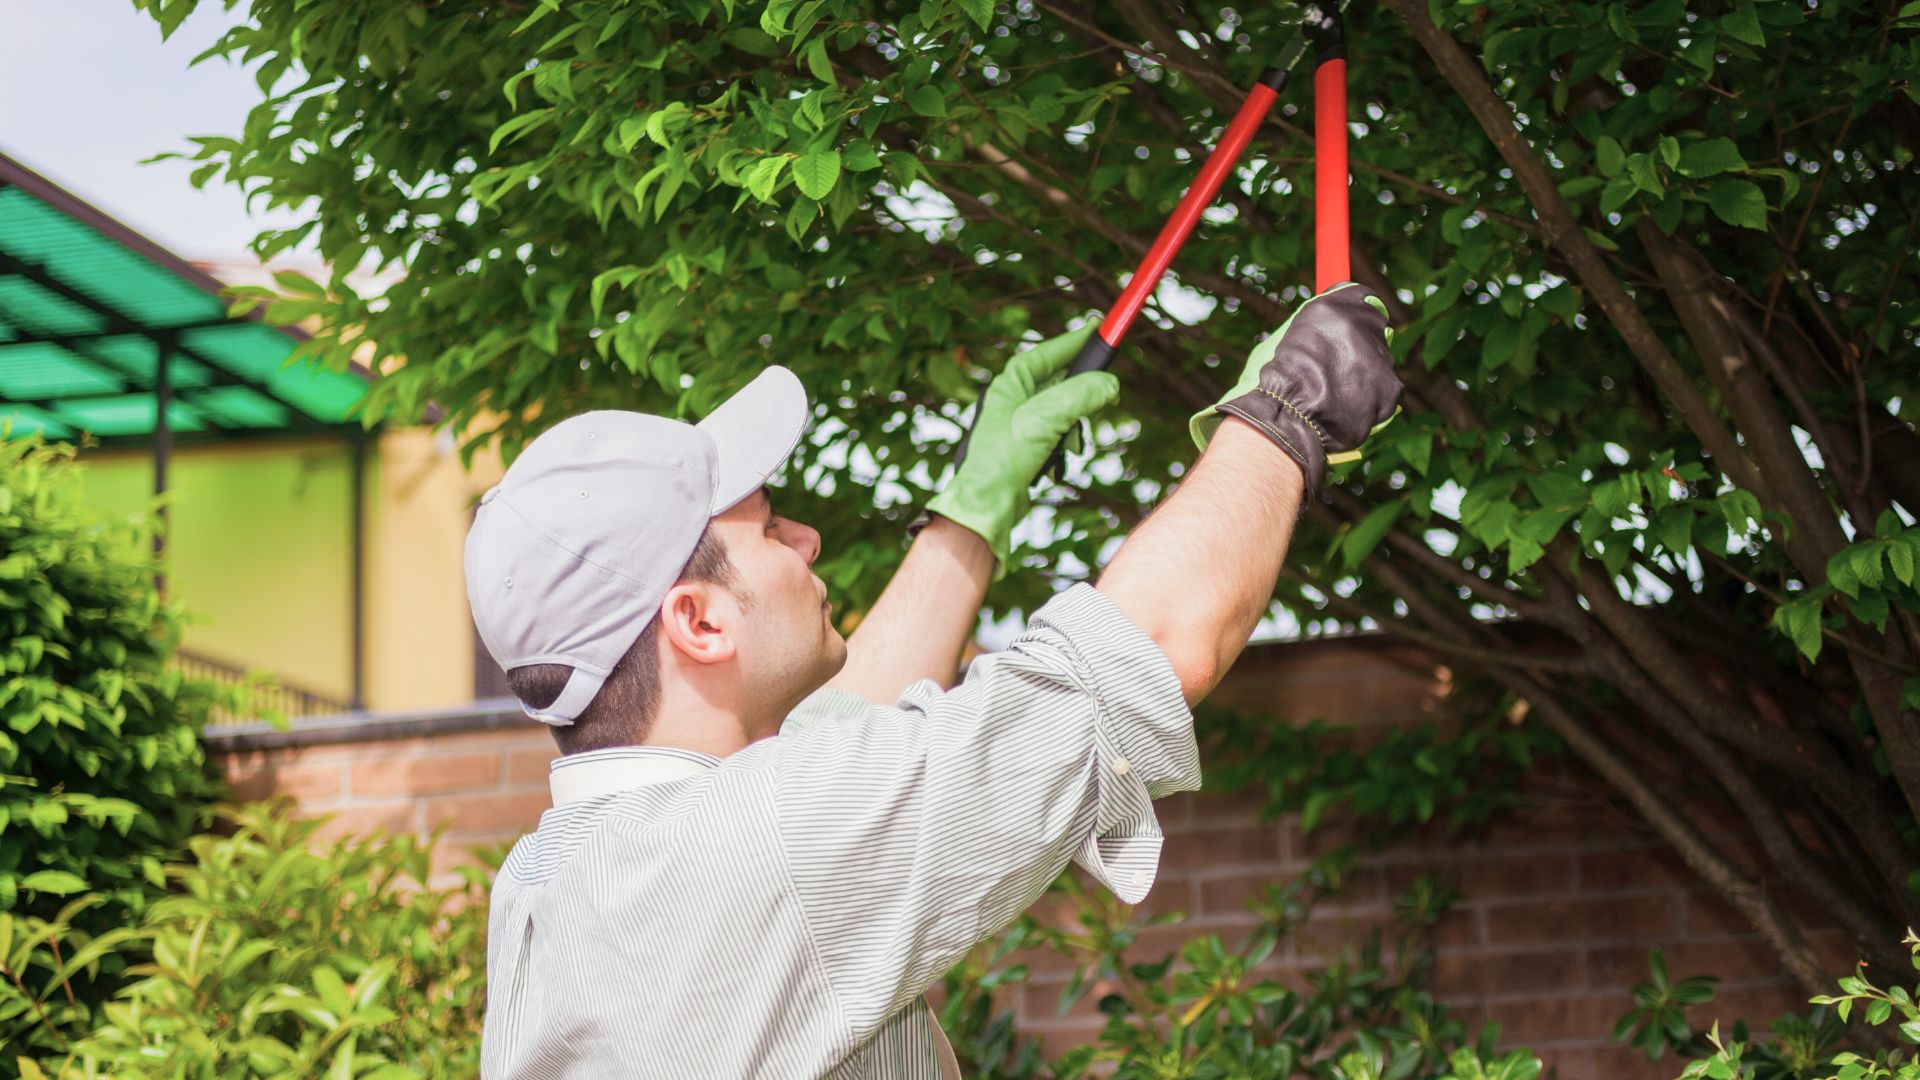 These Are The 7 Terrible Mistakes When Pruning Trees And Shrubs You Should Avoid At All Costs